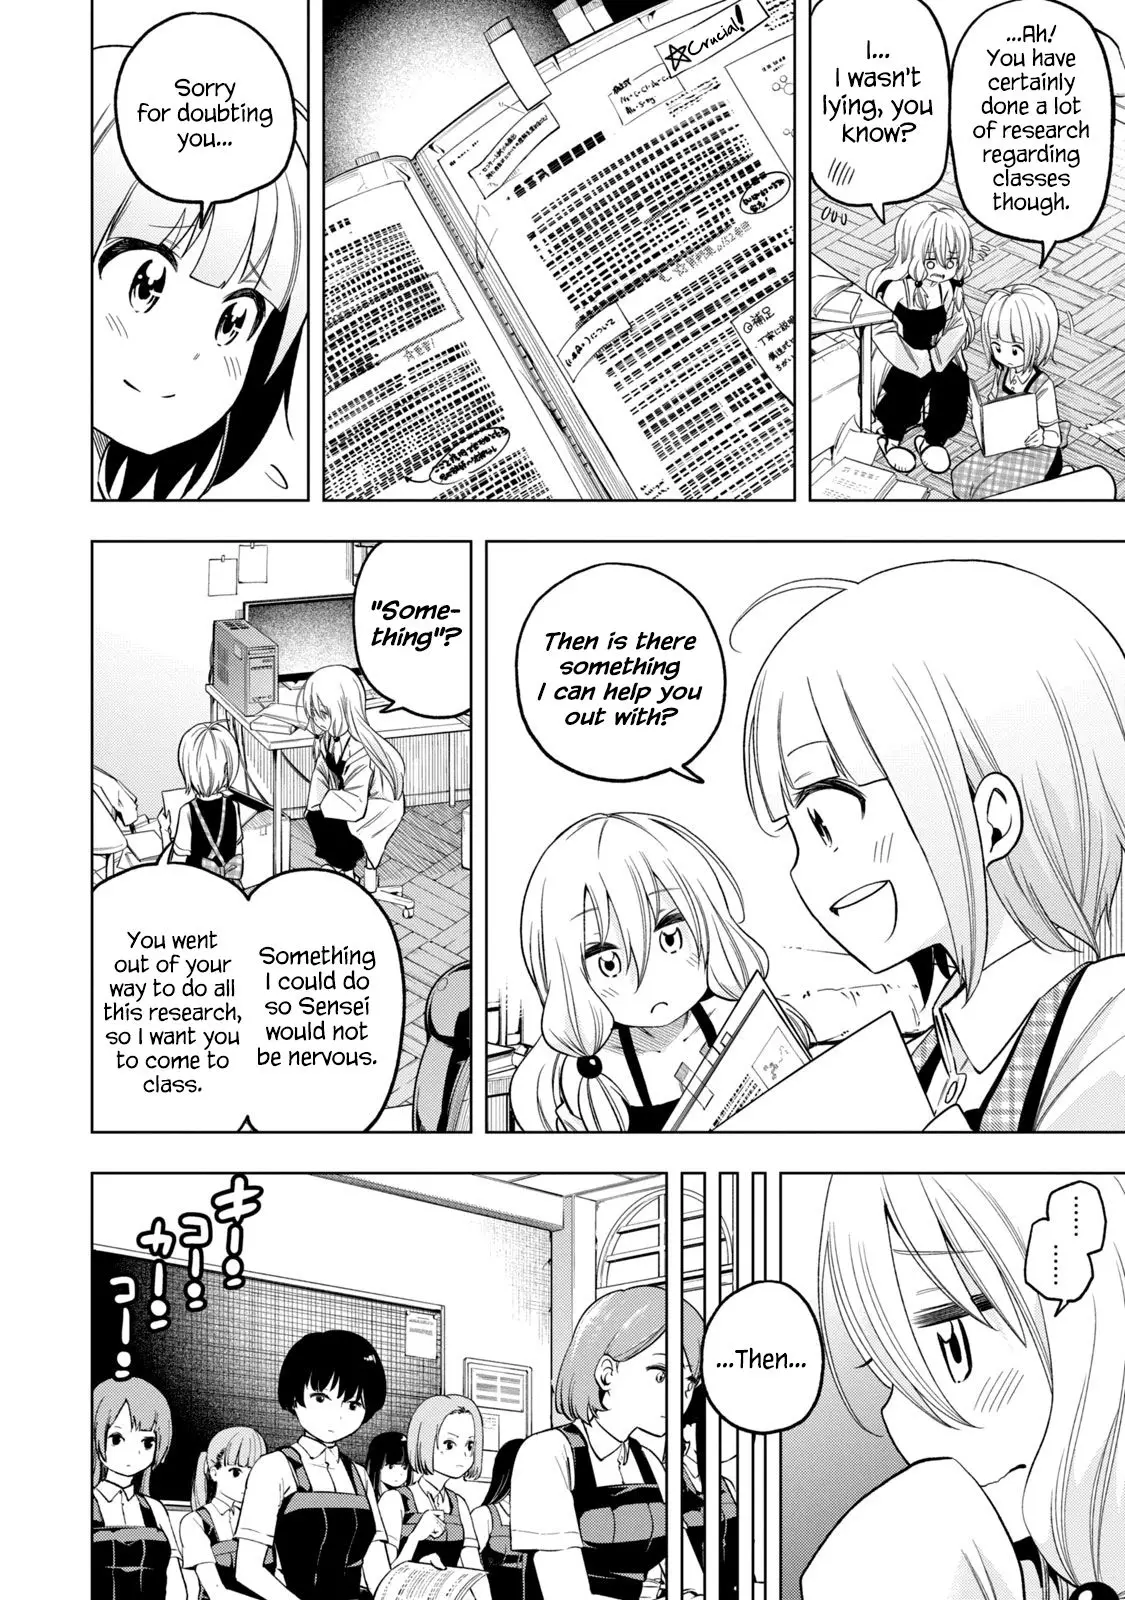 Why are you here Sensei!? - 83 page 6